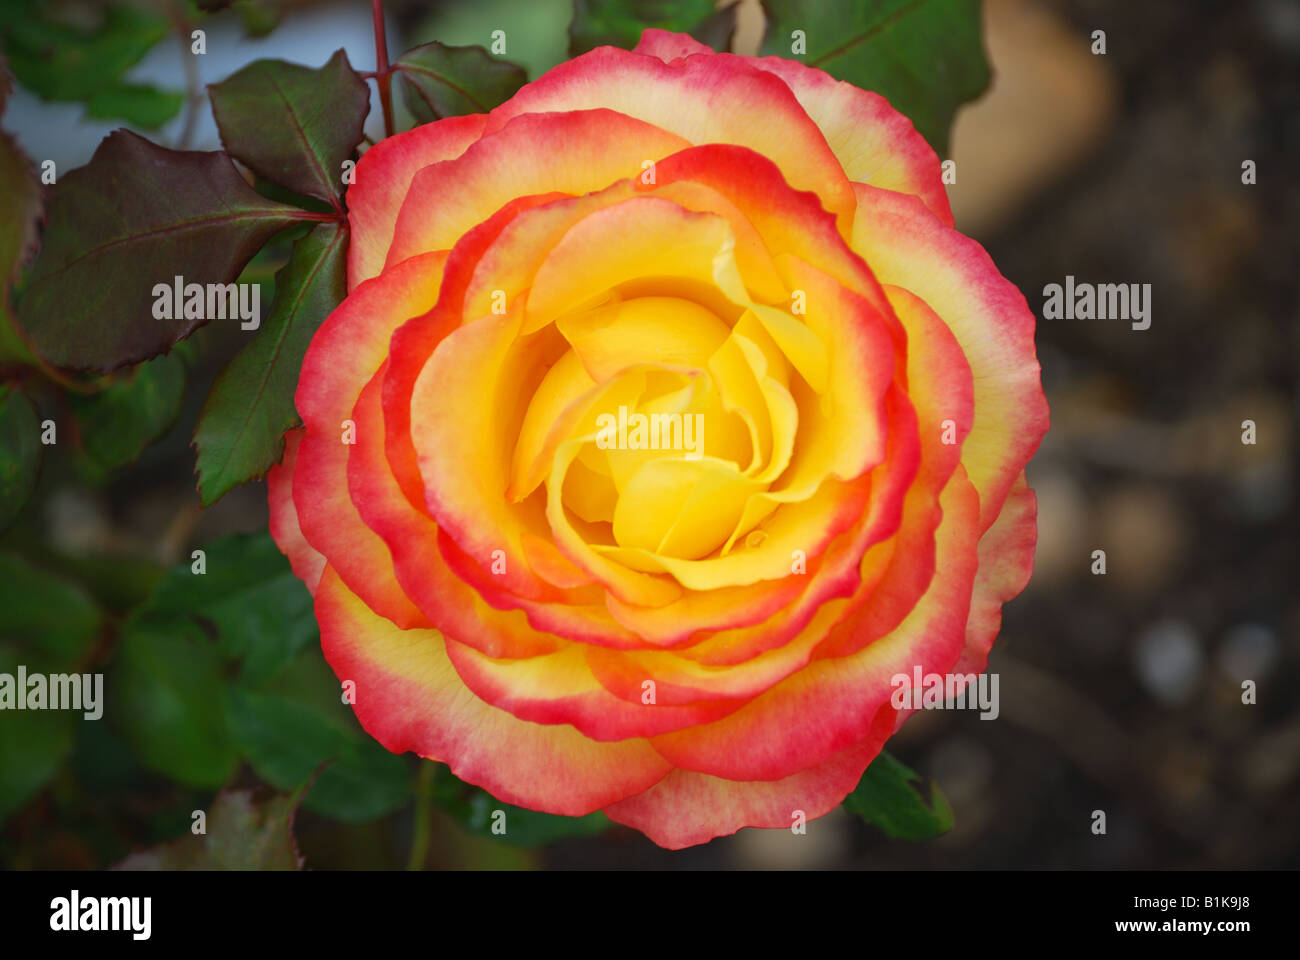 Pink and yellow rose, Gardens of the Rose, Chiswell Green, St. Albans, Hertfordshire, England, United Kingdom Stock Photo